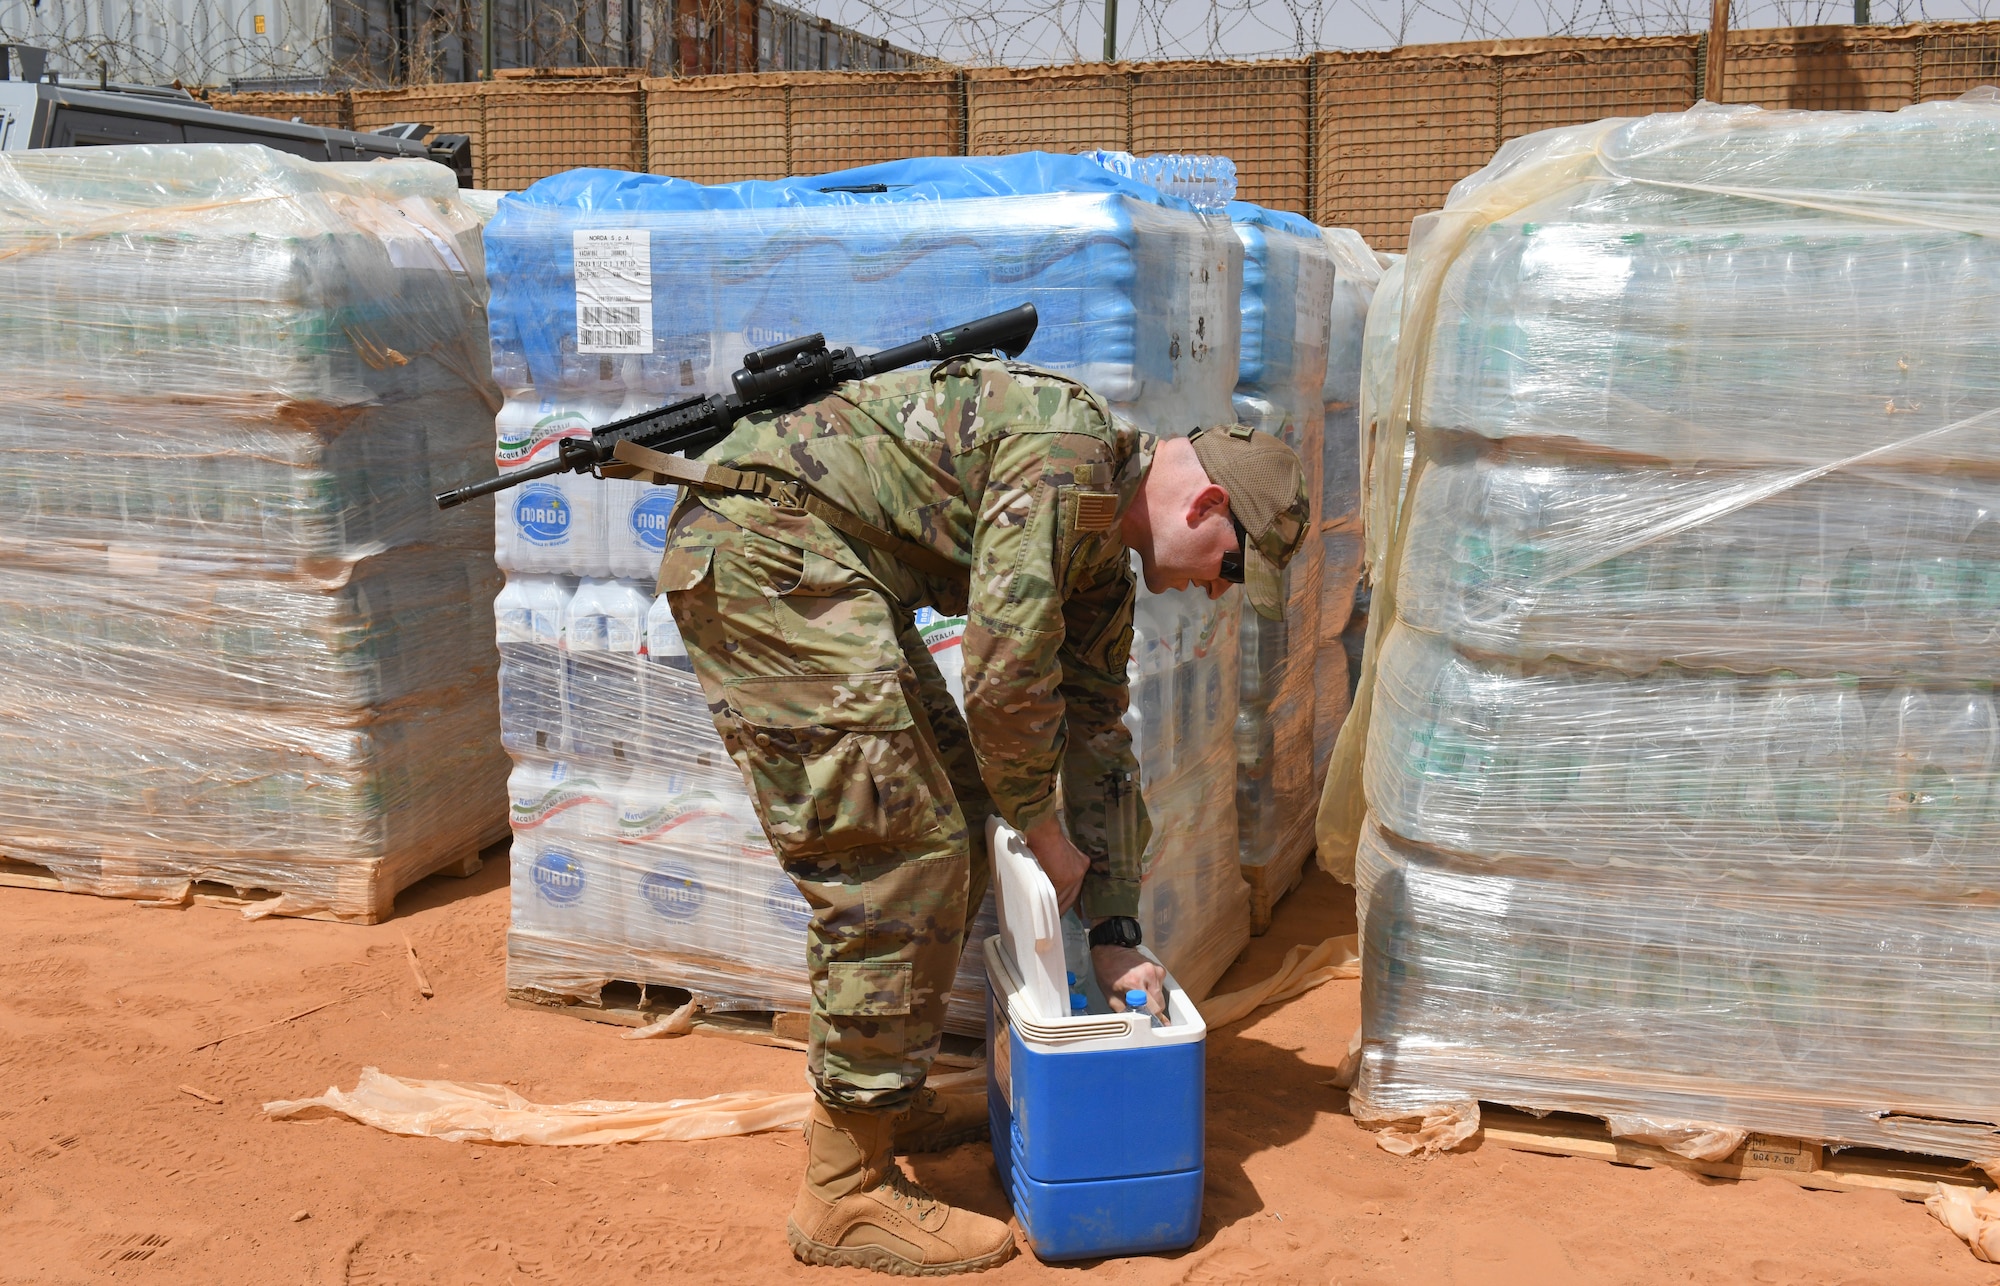 U.S. Air Force Tech. Sgt. Kristopher Beckwith, 768th Expeditionary Air Base Squadron bioenvironmental engineer, selects random water bottles to test water quality that comes from off base sources at Nigerien Air Base 101, Niamey, Niger, Feb. 16, 2021.